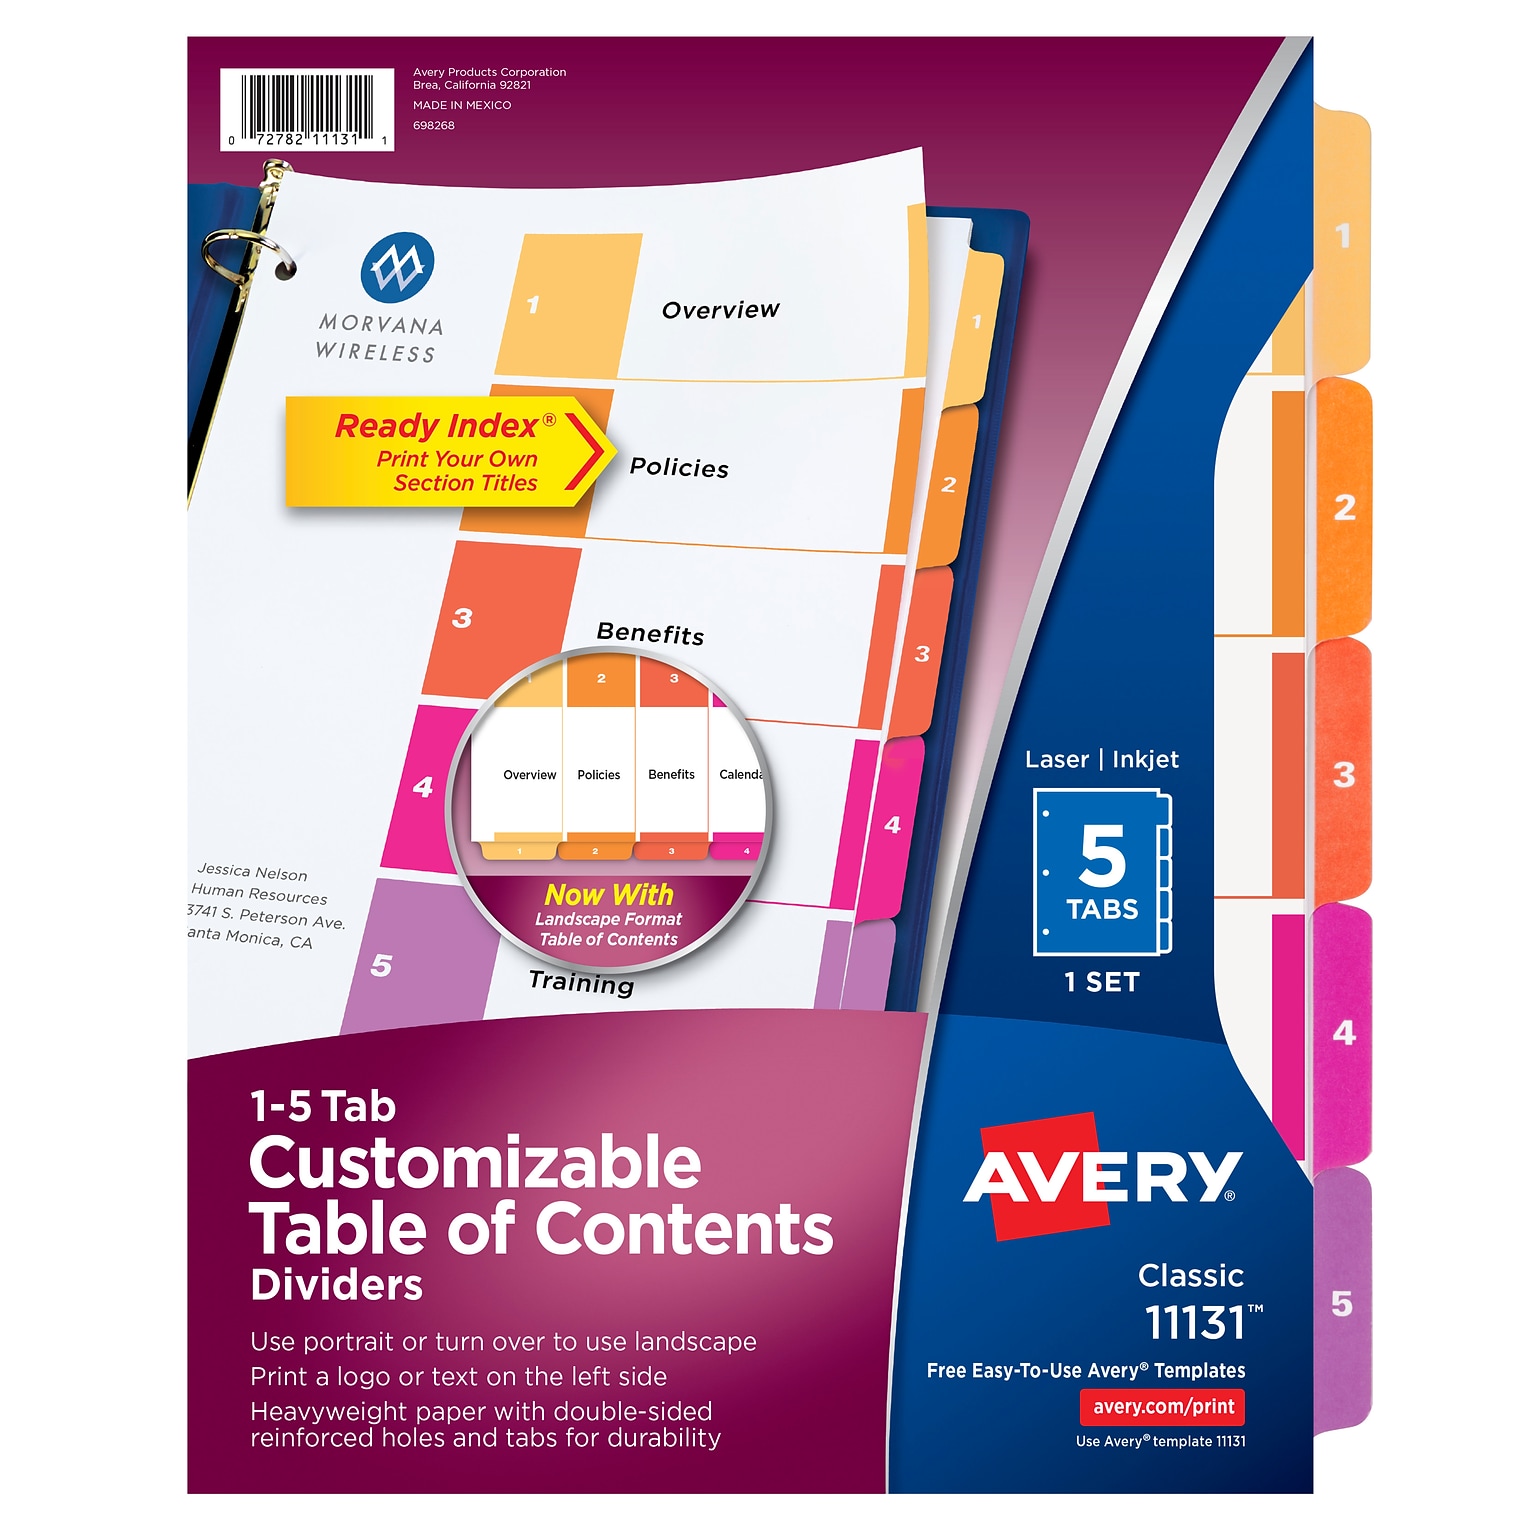 Avery Ready Index Table of Contents Paper Dividers, 1-5 Tabs, Multicolor (11131)